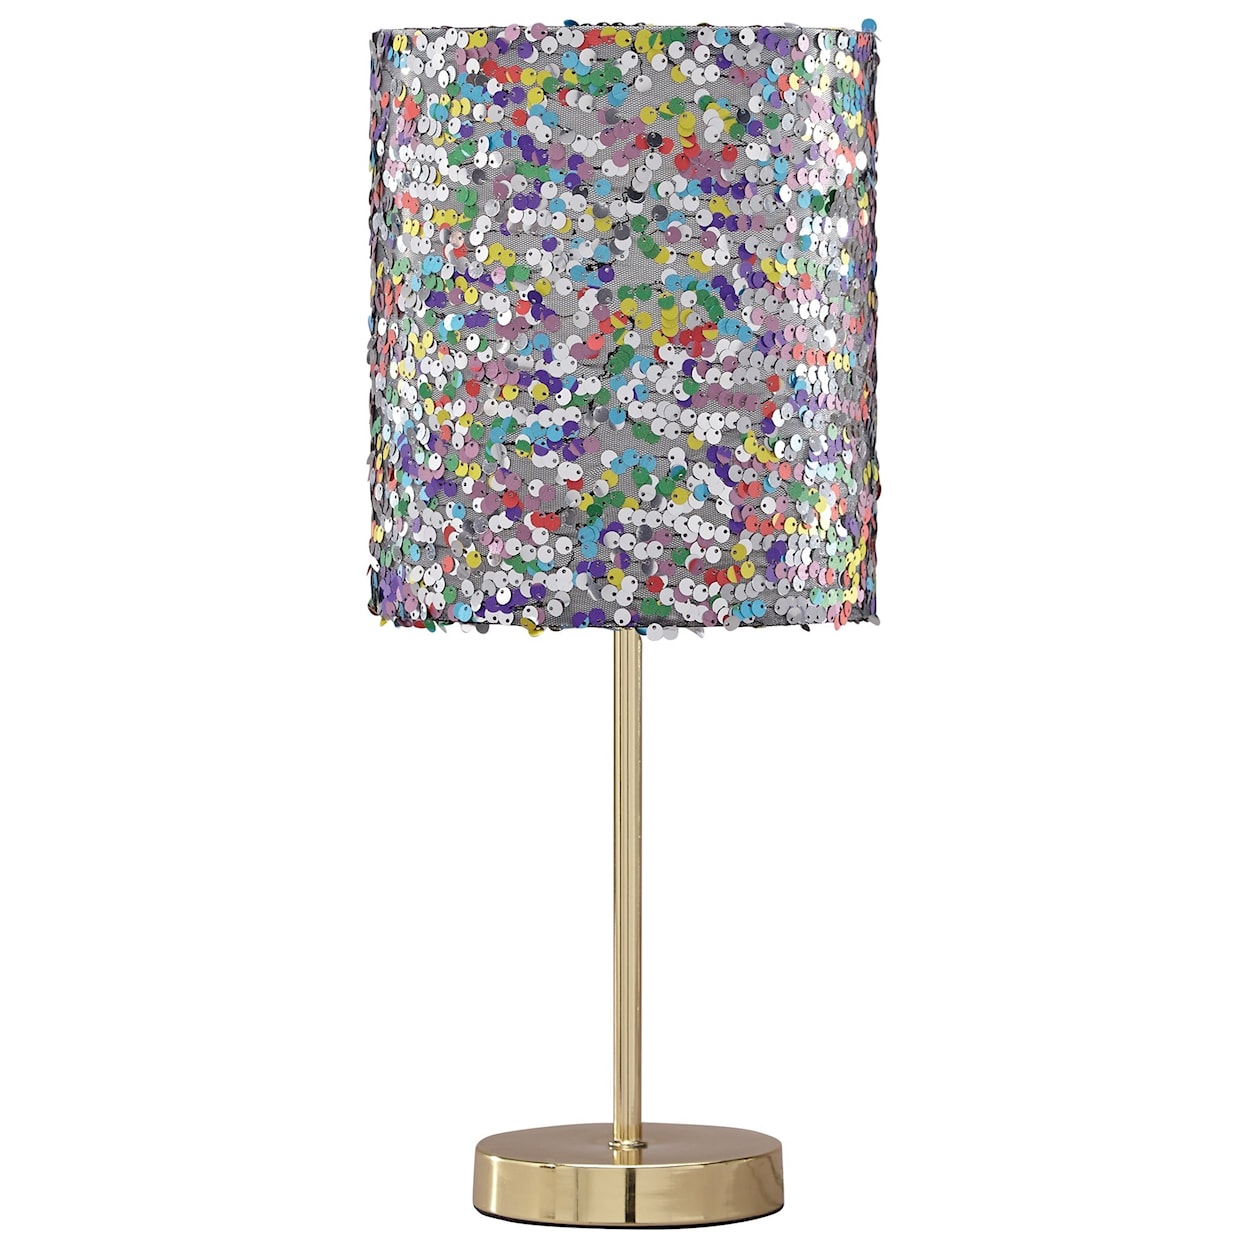 Signature Design by Ashley Lamps - Contemporary Maddy Multi Metal Table Lamp